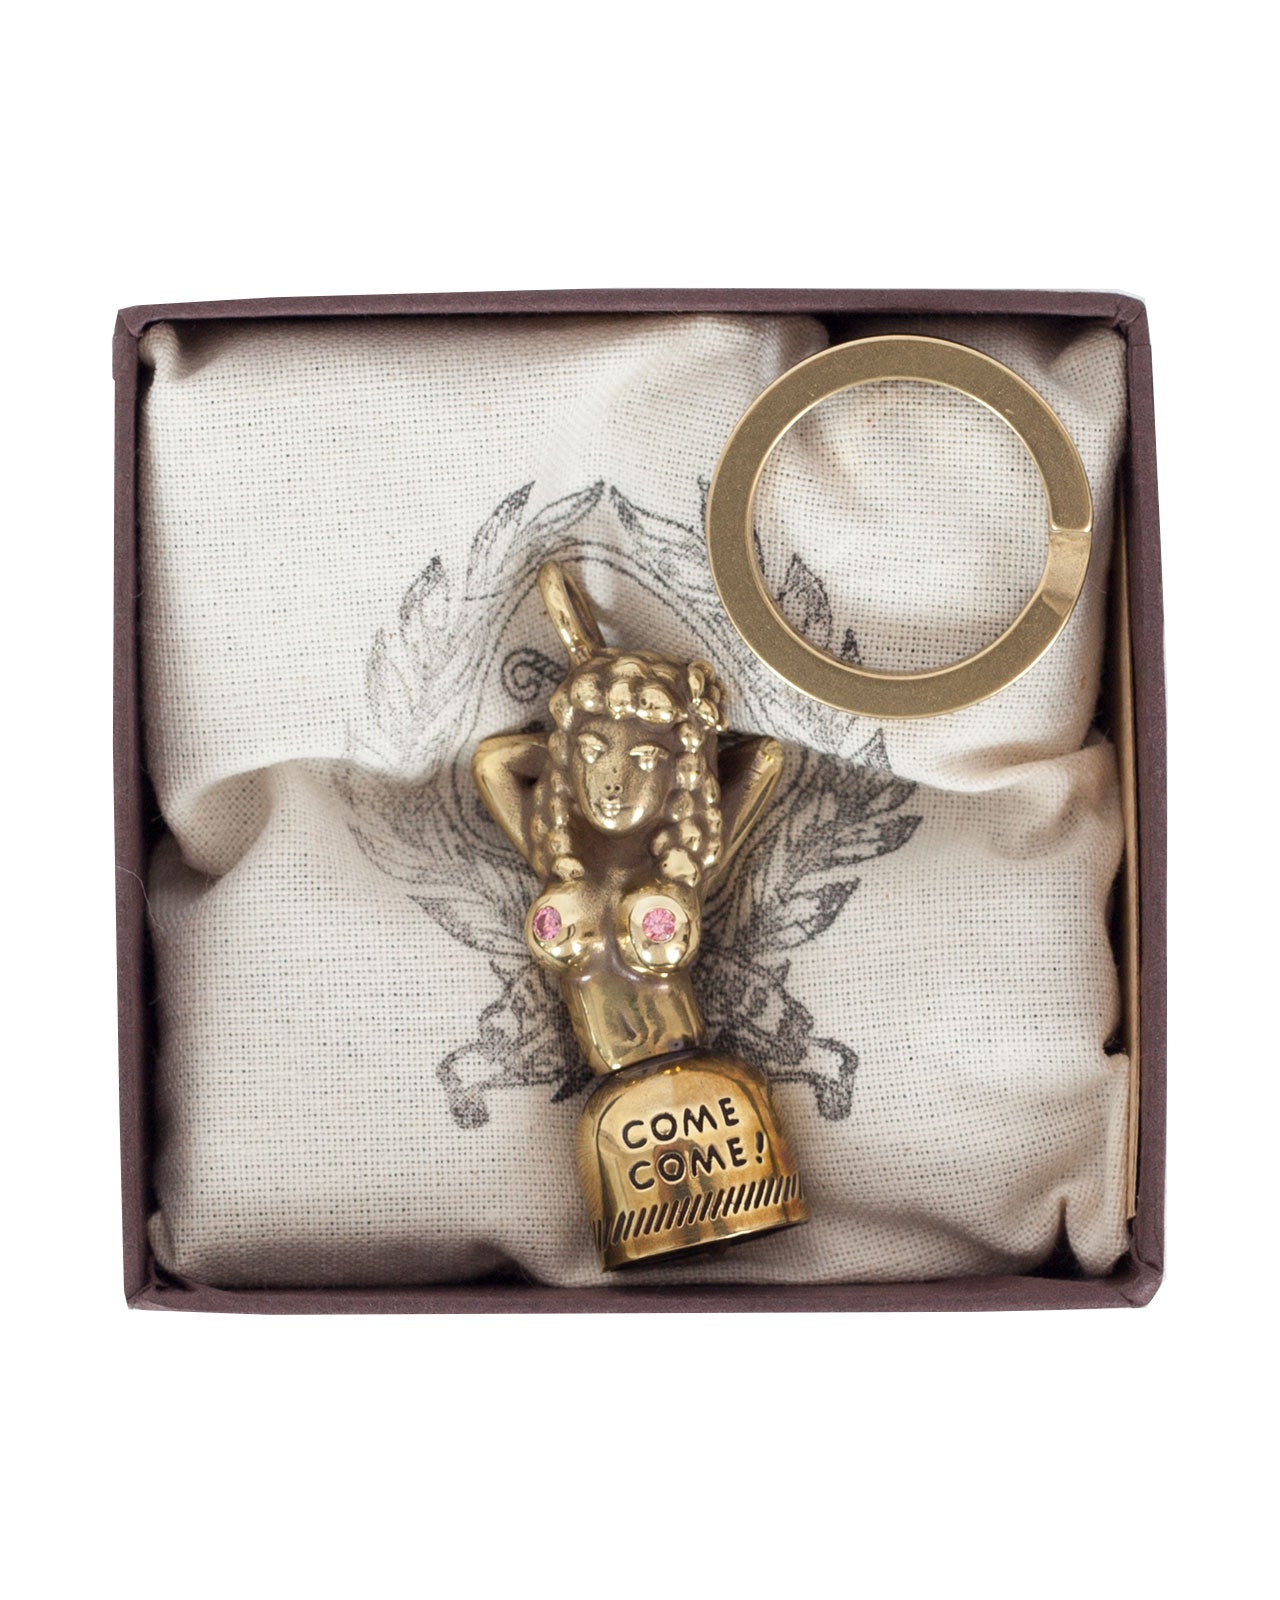 Peanuts & Co Come Come Bell Key Ring